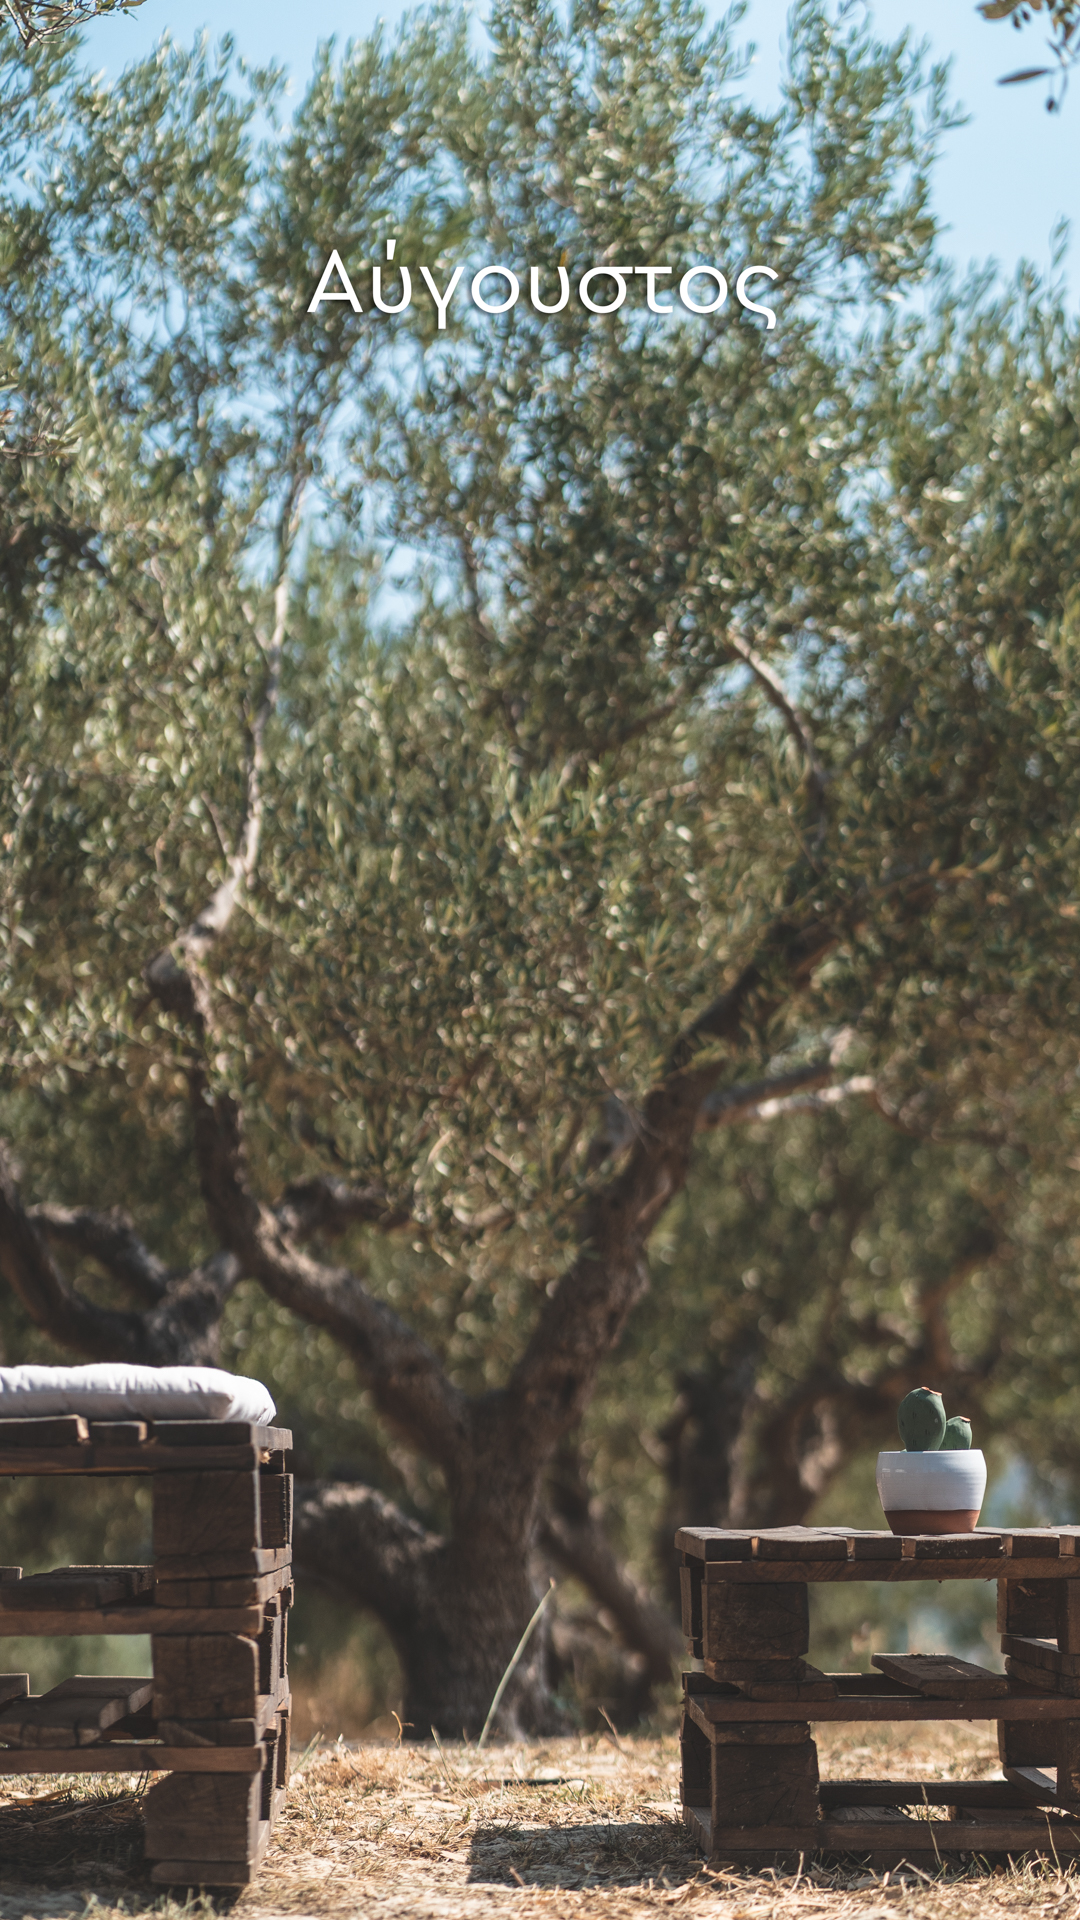 Picnic Basket in the Olive Groves